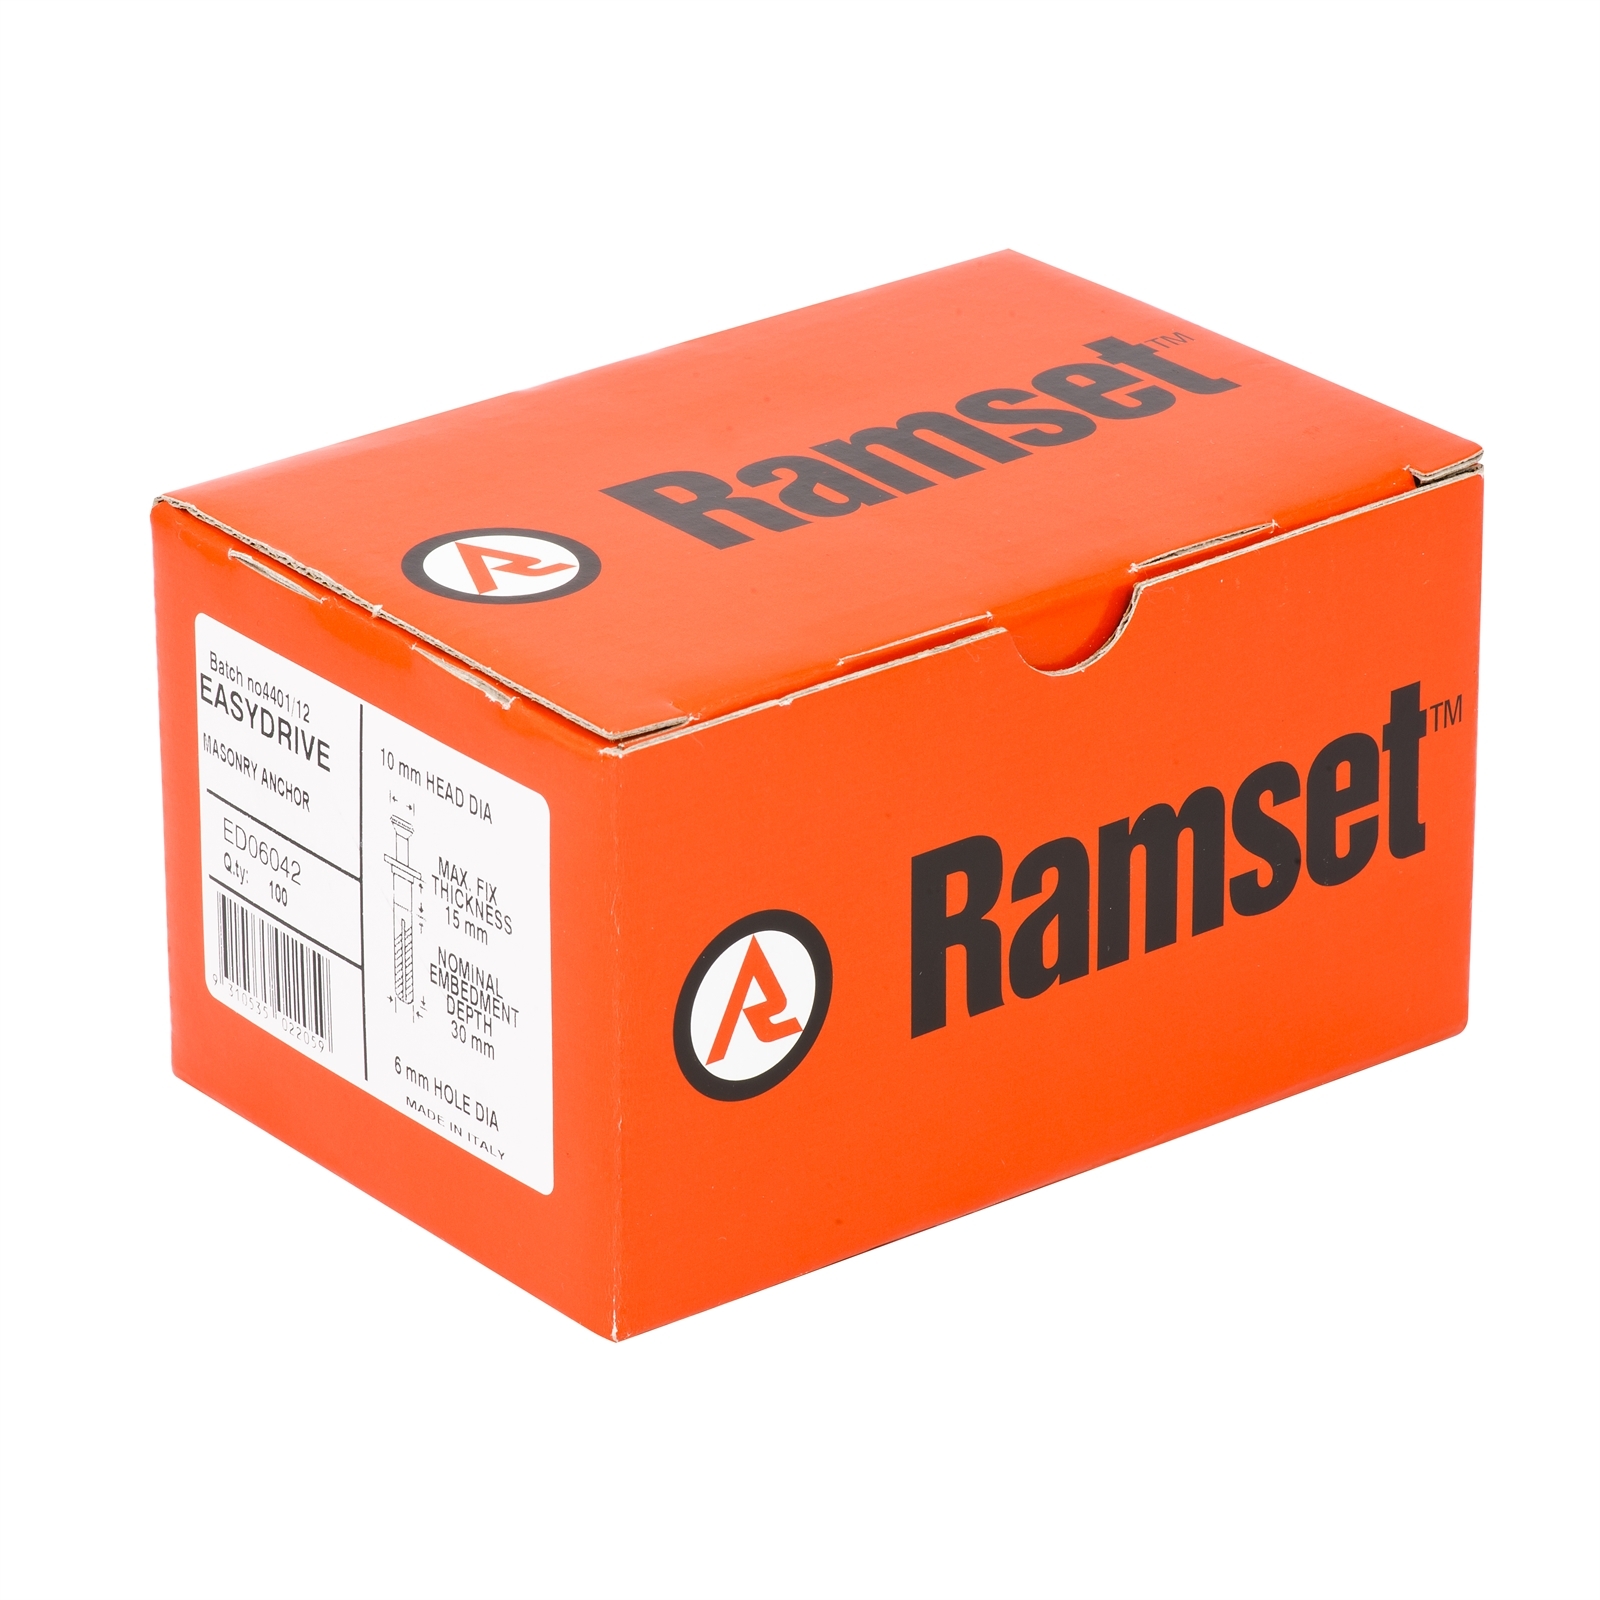 Ramset 6 x 42mm EasyDrive Anchor - 100 Pack